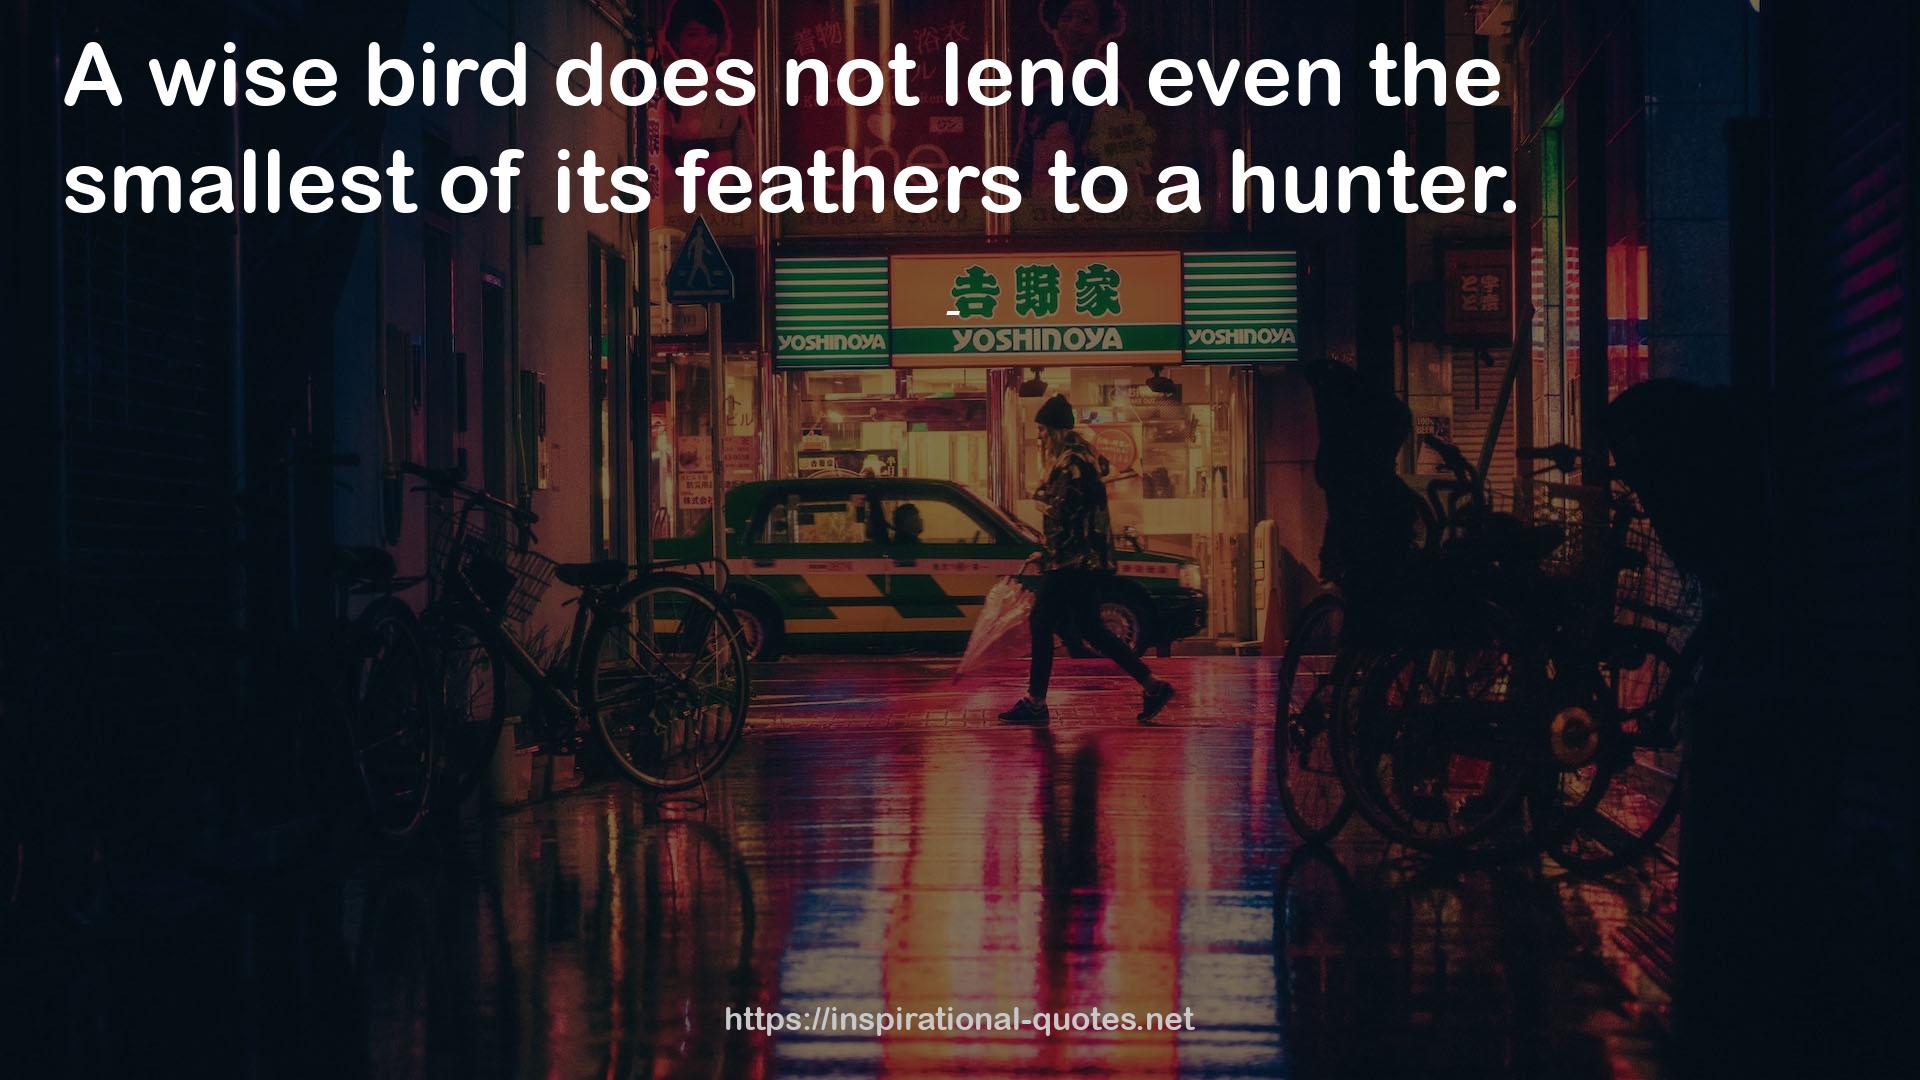 its feathers  QUOTES